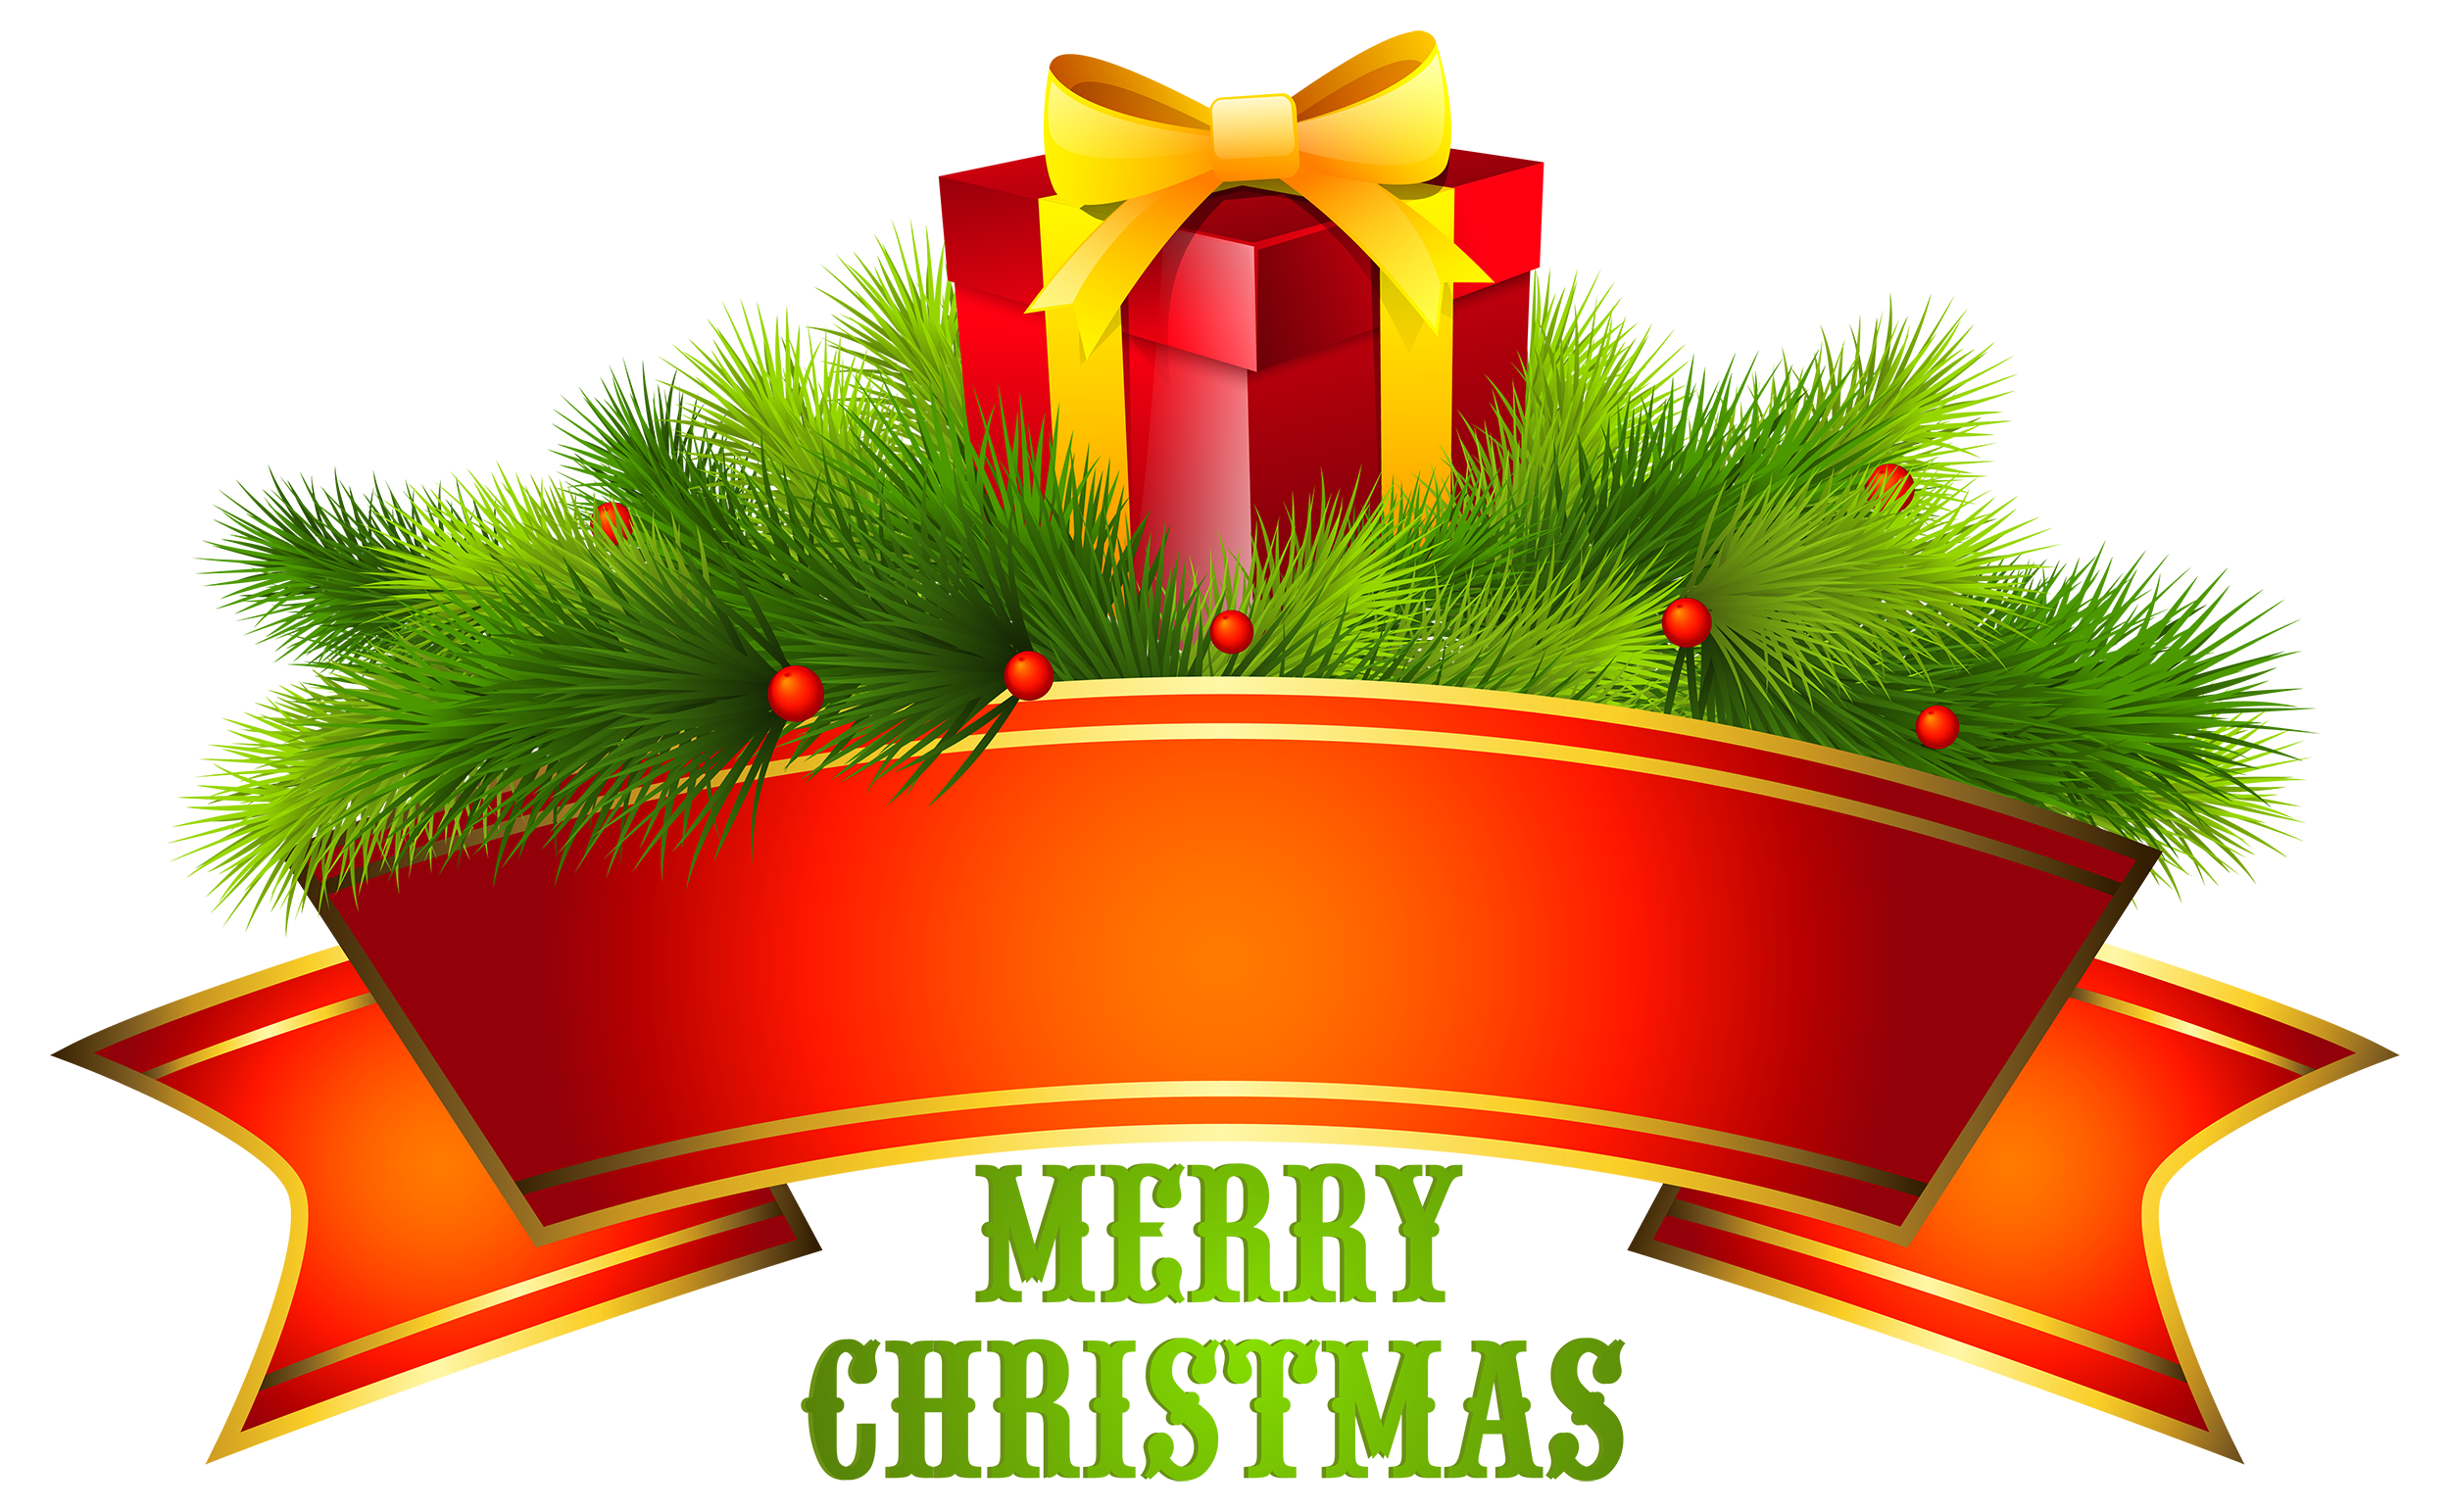 Merry Christmas Images Clip Art Merry And New Year Image Clipartix